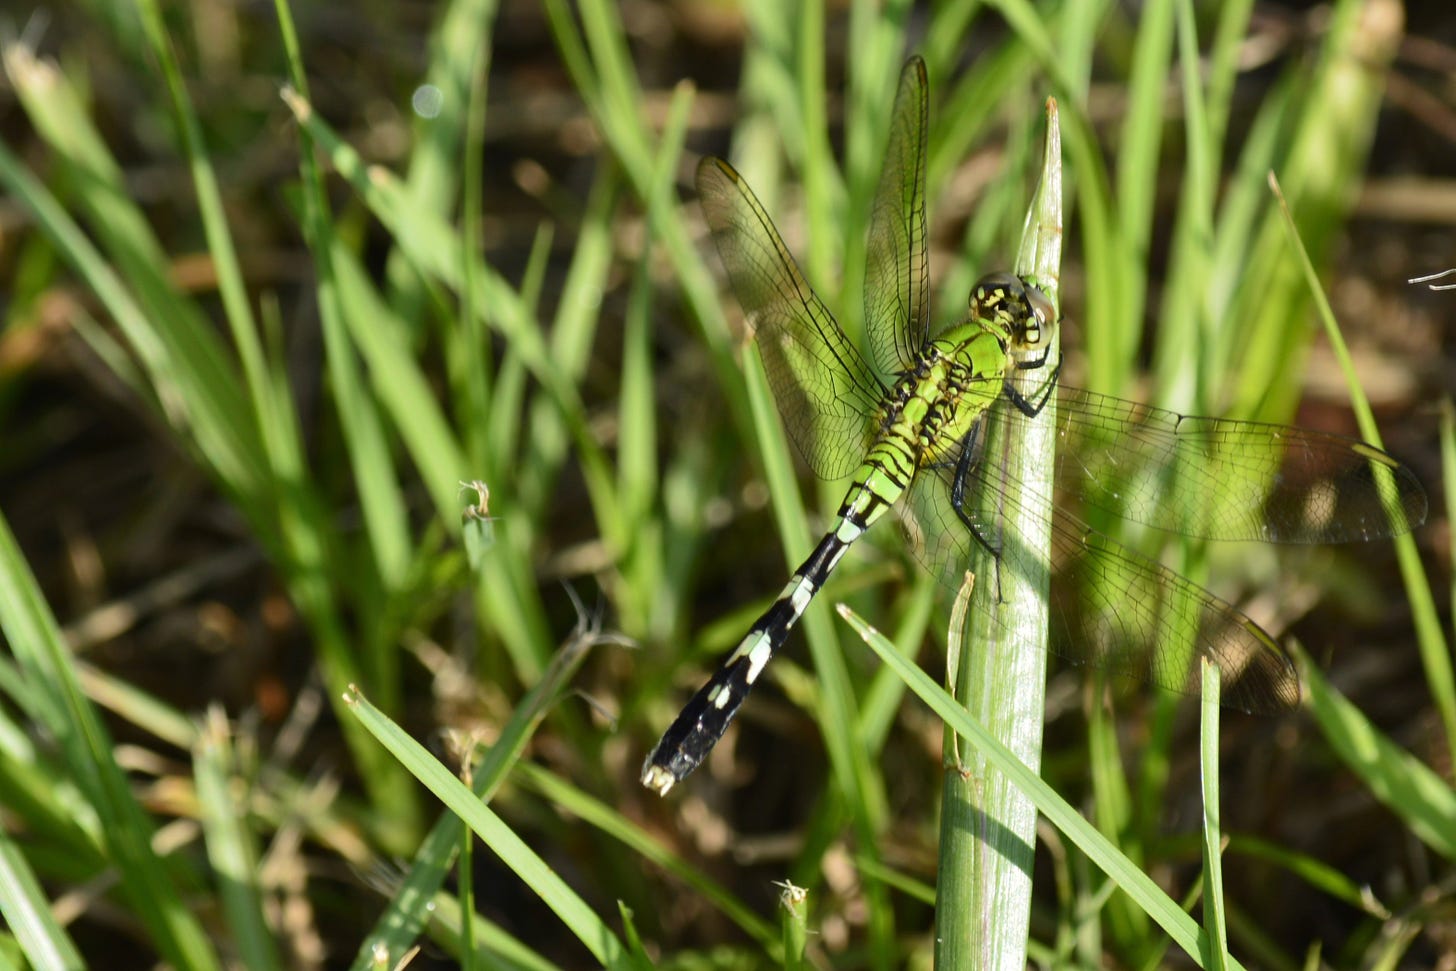 A green and black dragonfly grasping a single leaf of grass against a background of grass